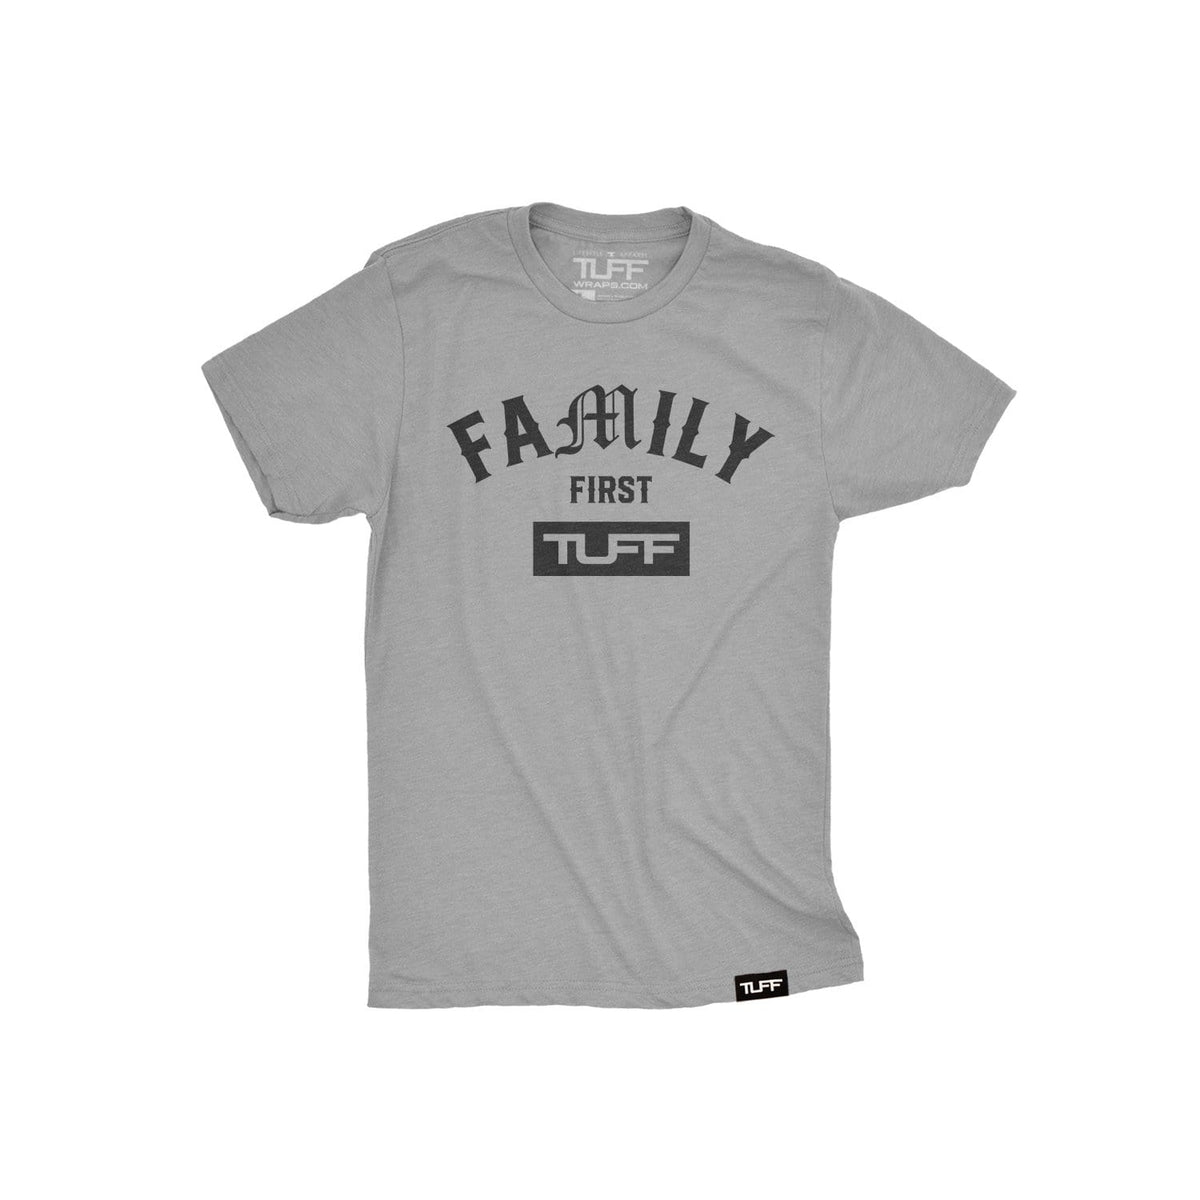 Family First Youth Tee XS / Heather Gray TuffWraps.com